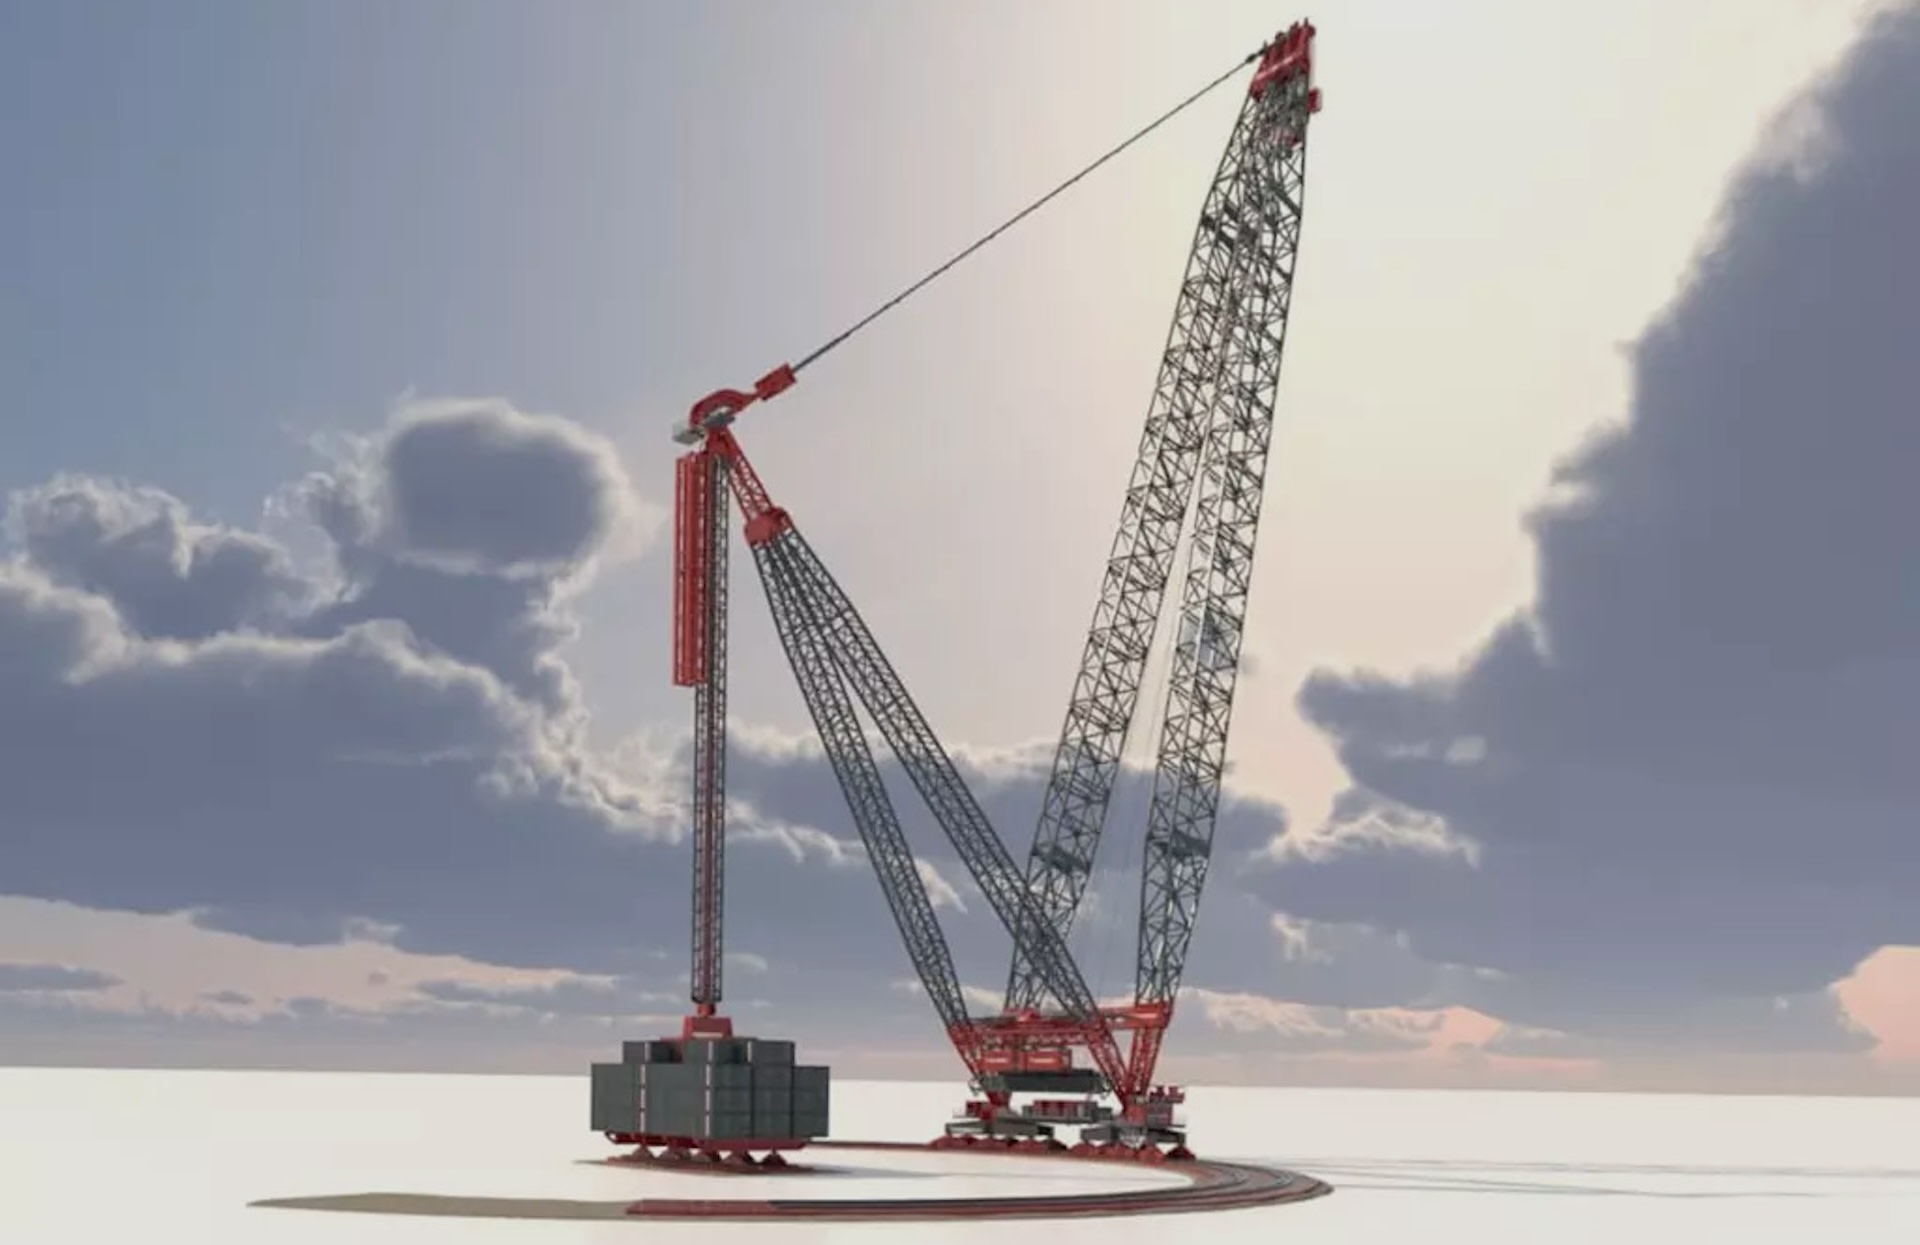 World’s largest land-based crane makes monumental impact with new electric capabilities — here’s how it could revolutionize the construction industry